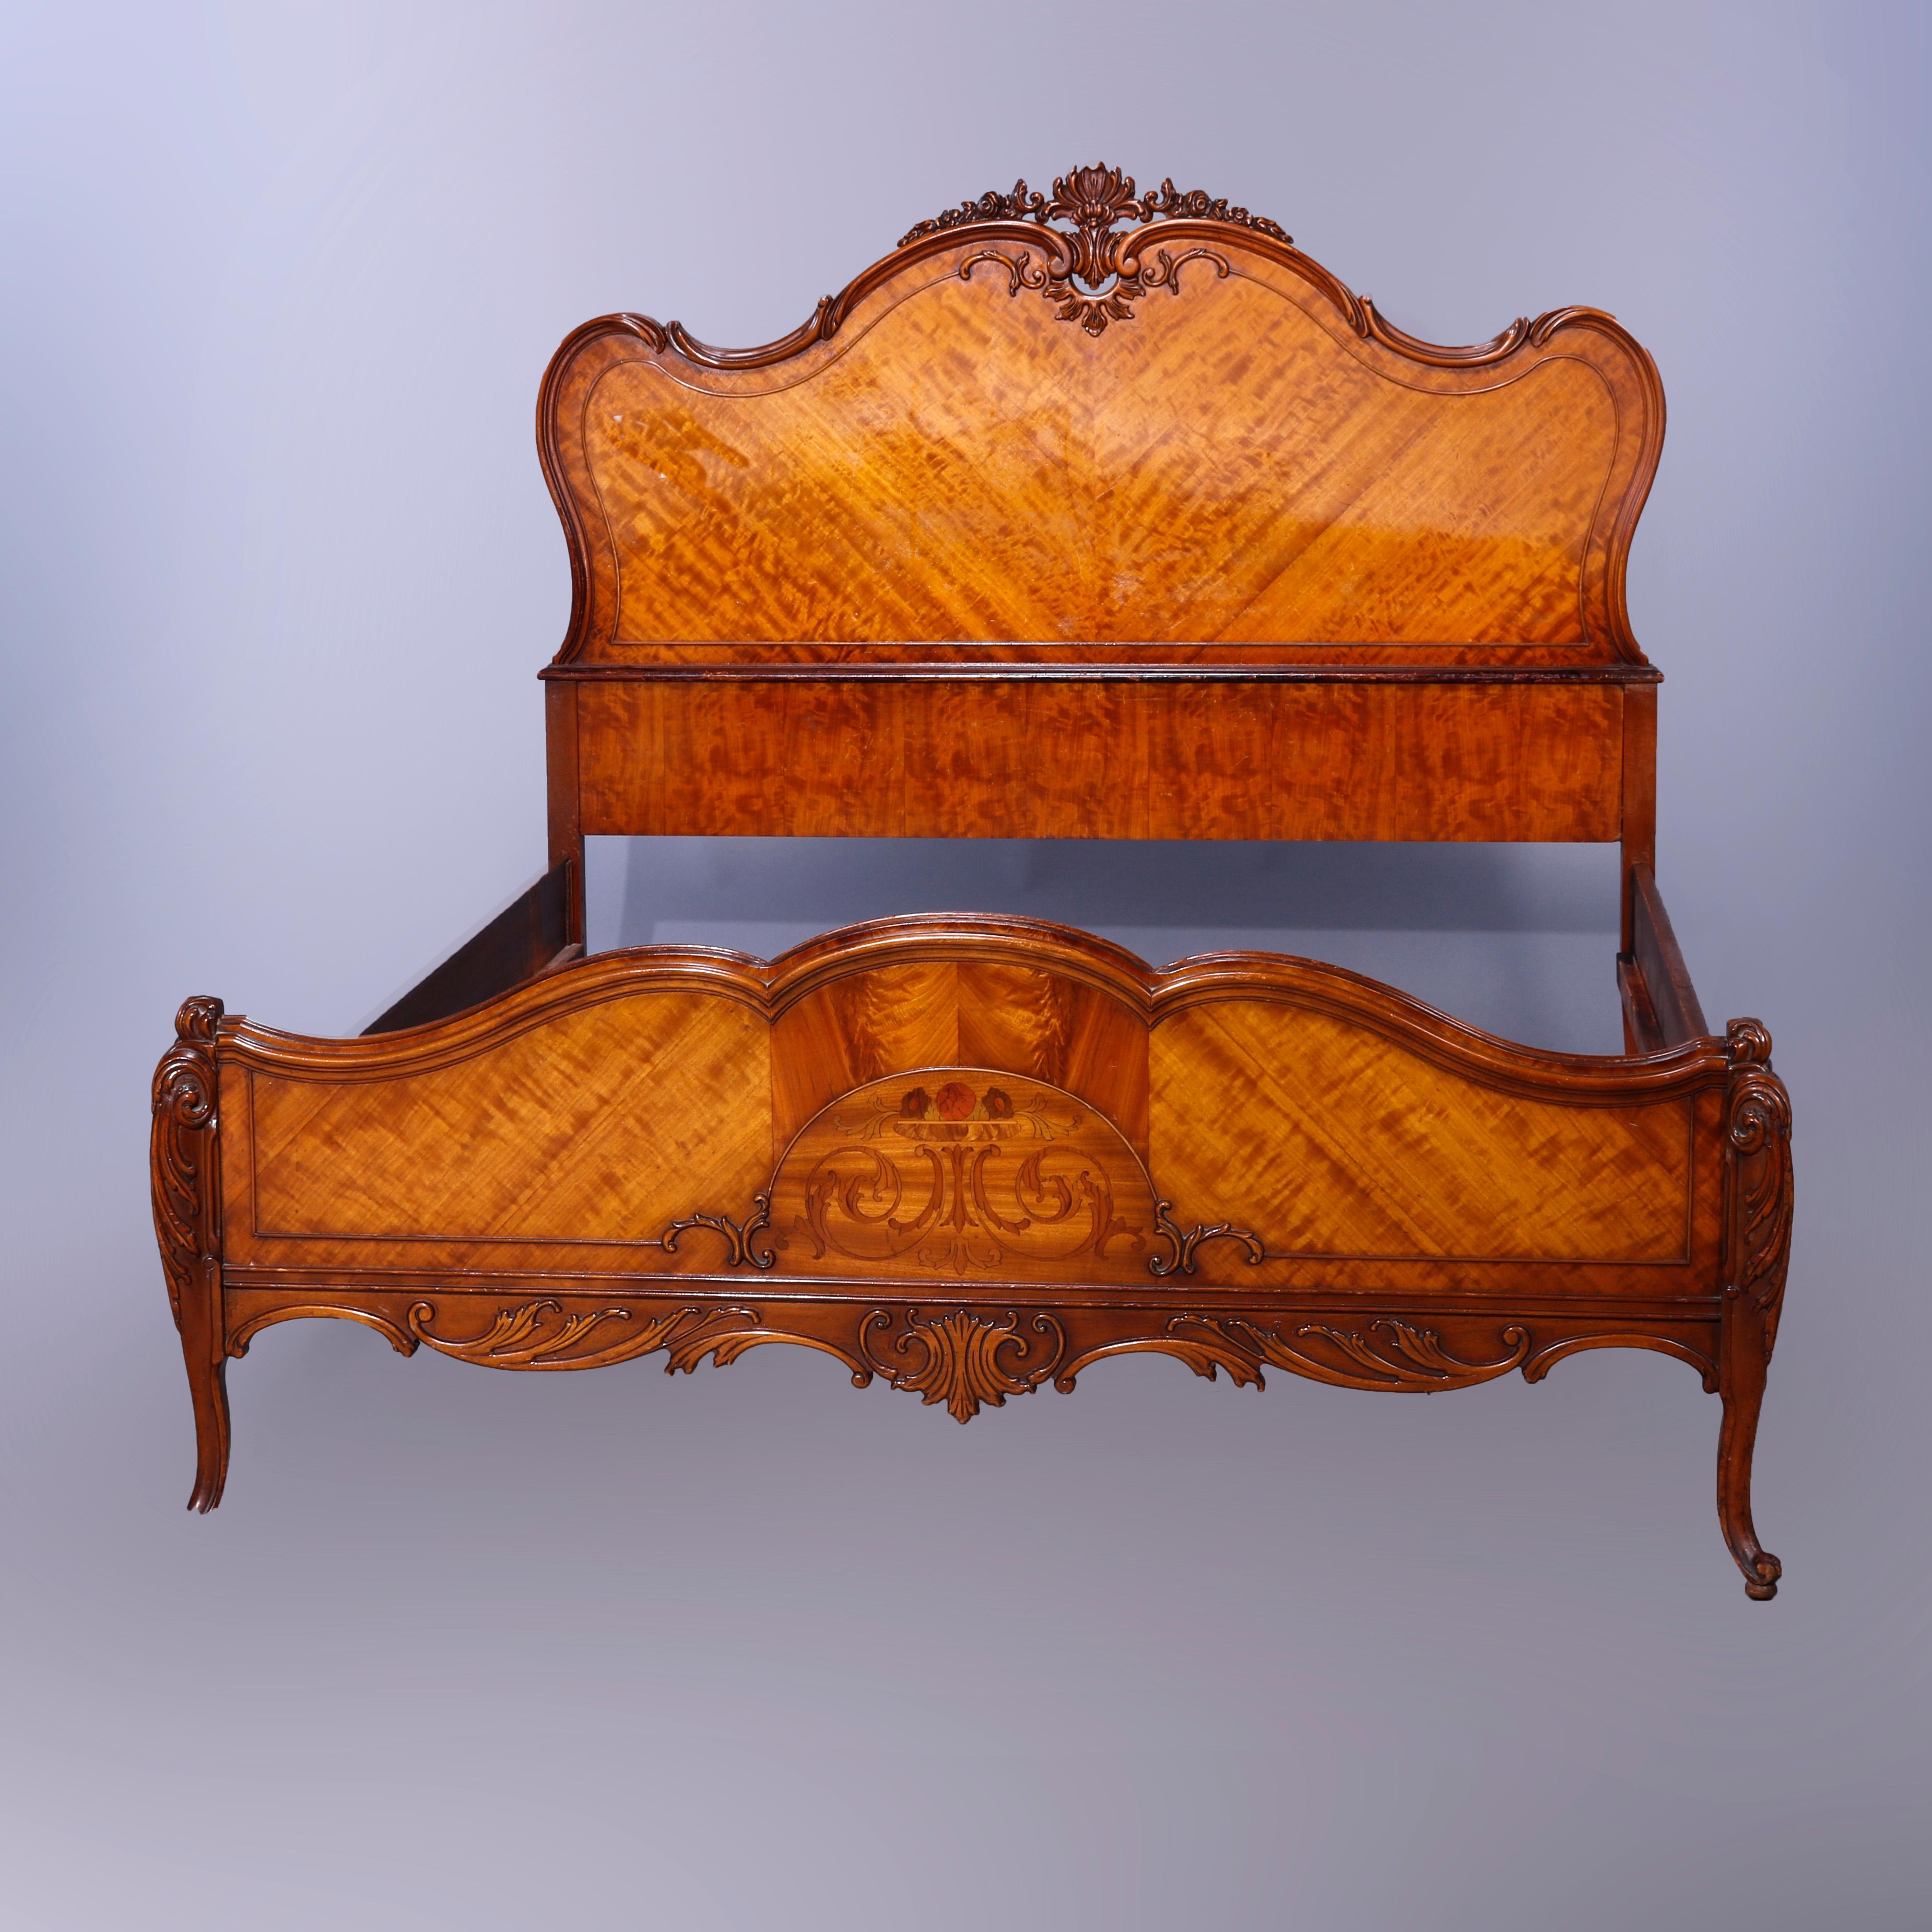 An antique French double bed offers mahogany frame with carved foliate crest over shaped headboard having bookmatched satinwood facing, matching footboard having marquetry inlaid urn and scrolled foliate design, raised on cabriole legs having carved